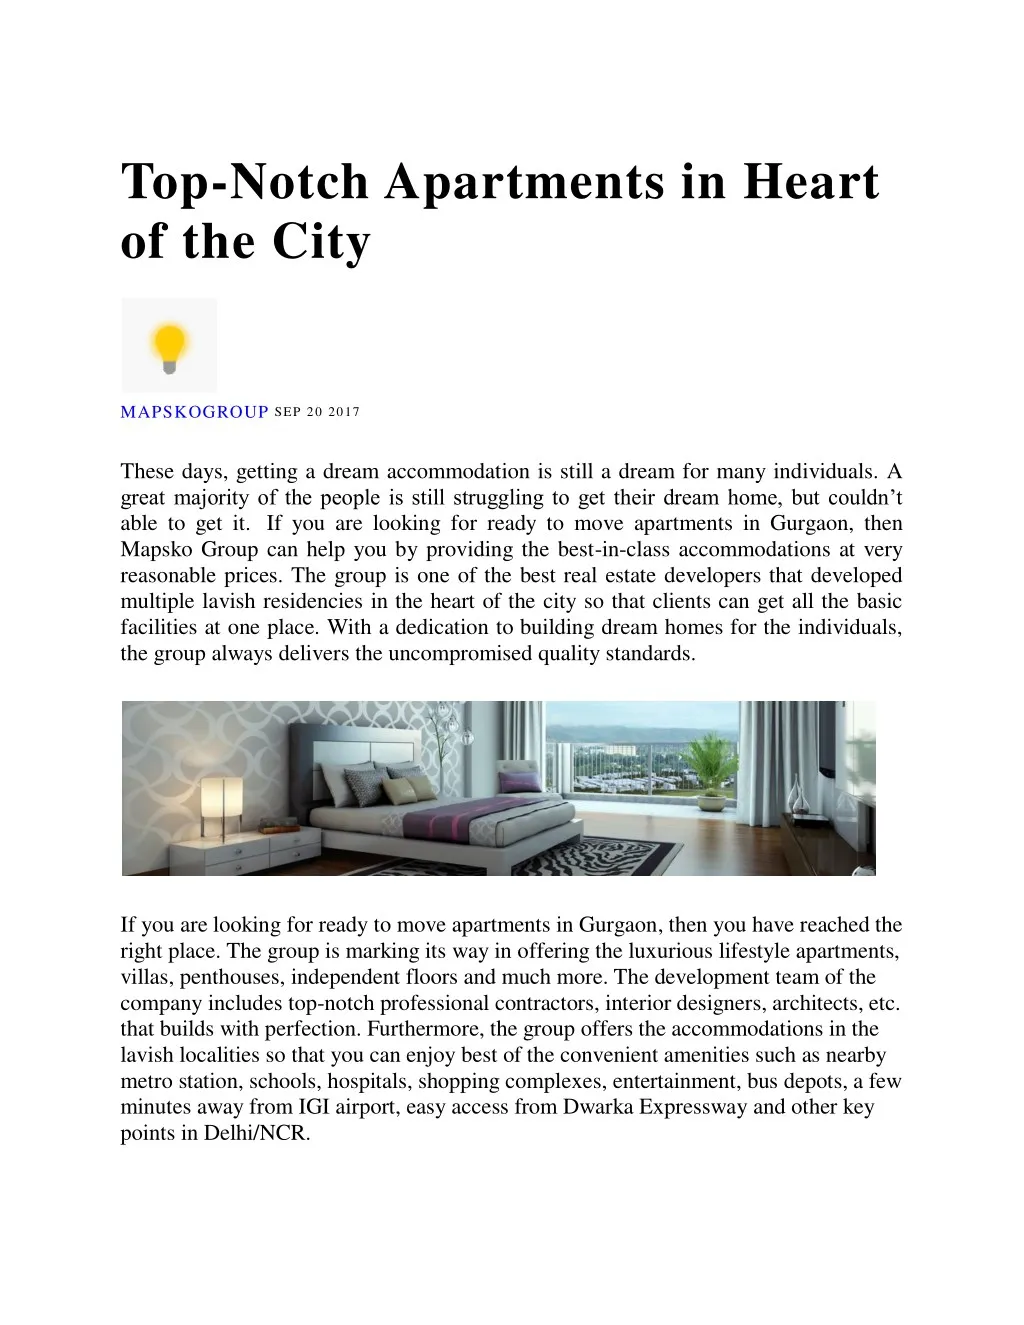 top notch apartments in heart of the city